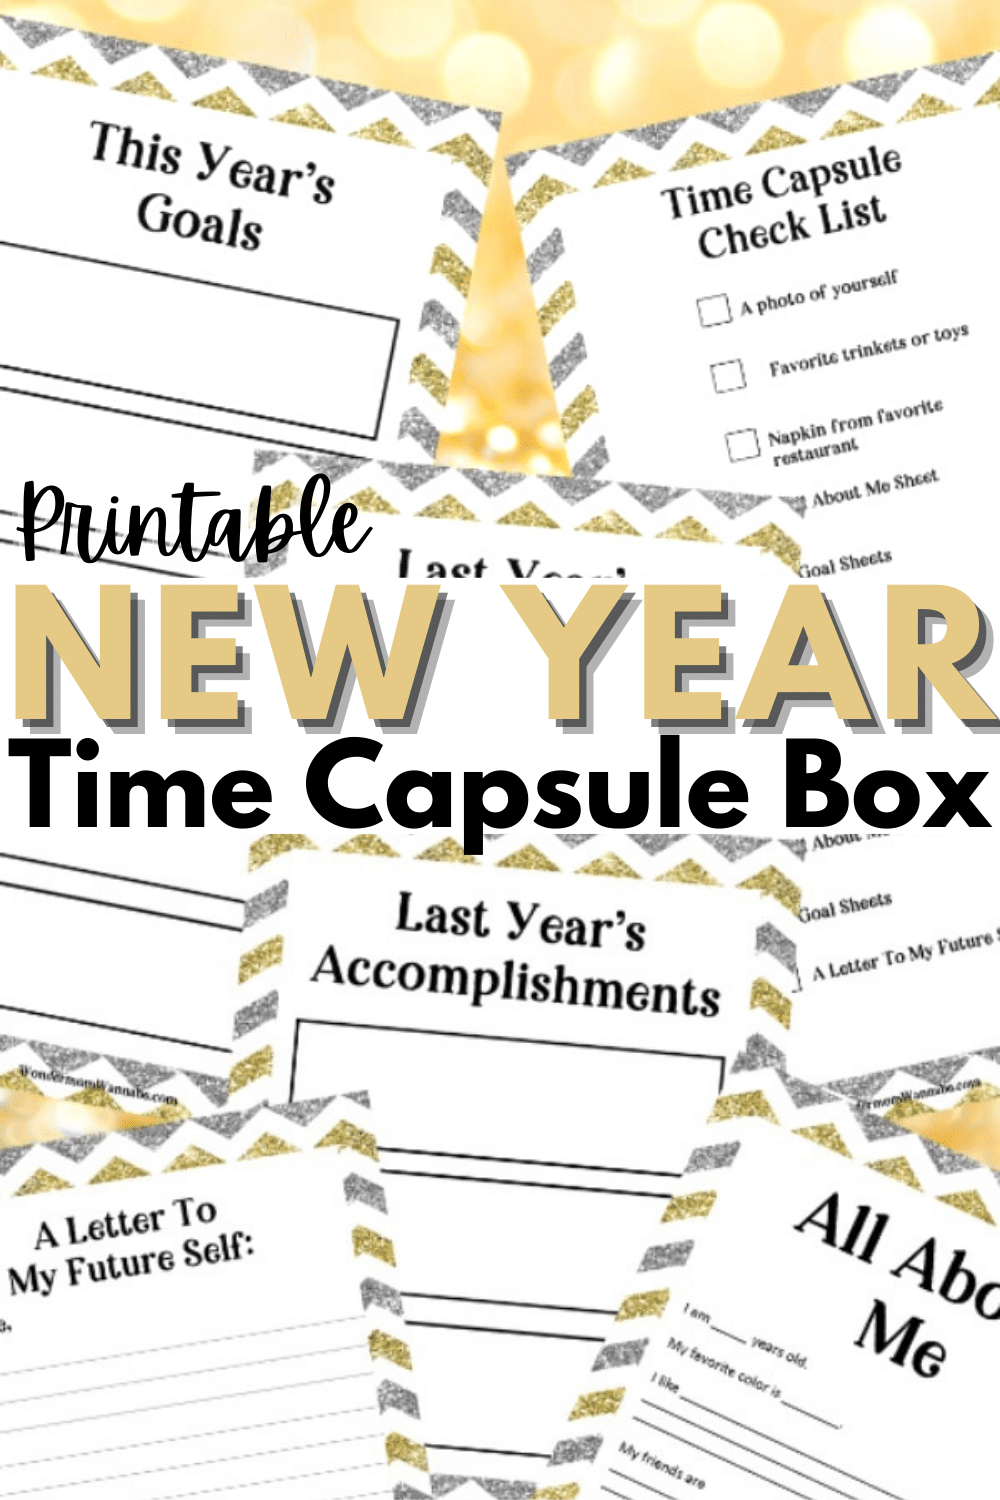 A New Year Time Capsule Box is a great family activity and tradition to start. These free time capsule box printables make it fun and easy to do. #printables #newyearseve #timecapsule via @wondermomwannab